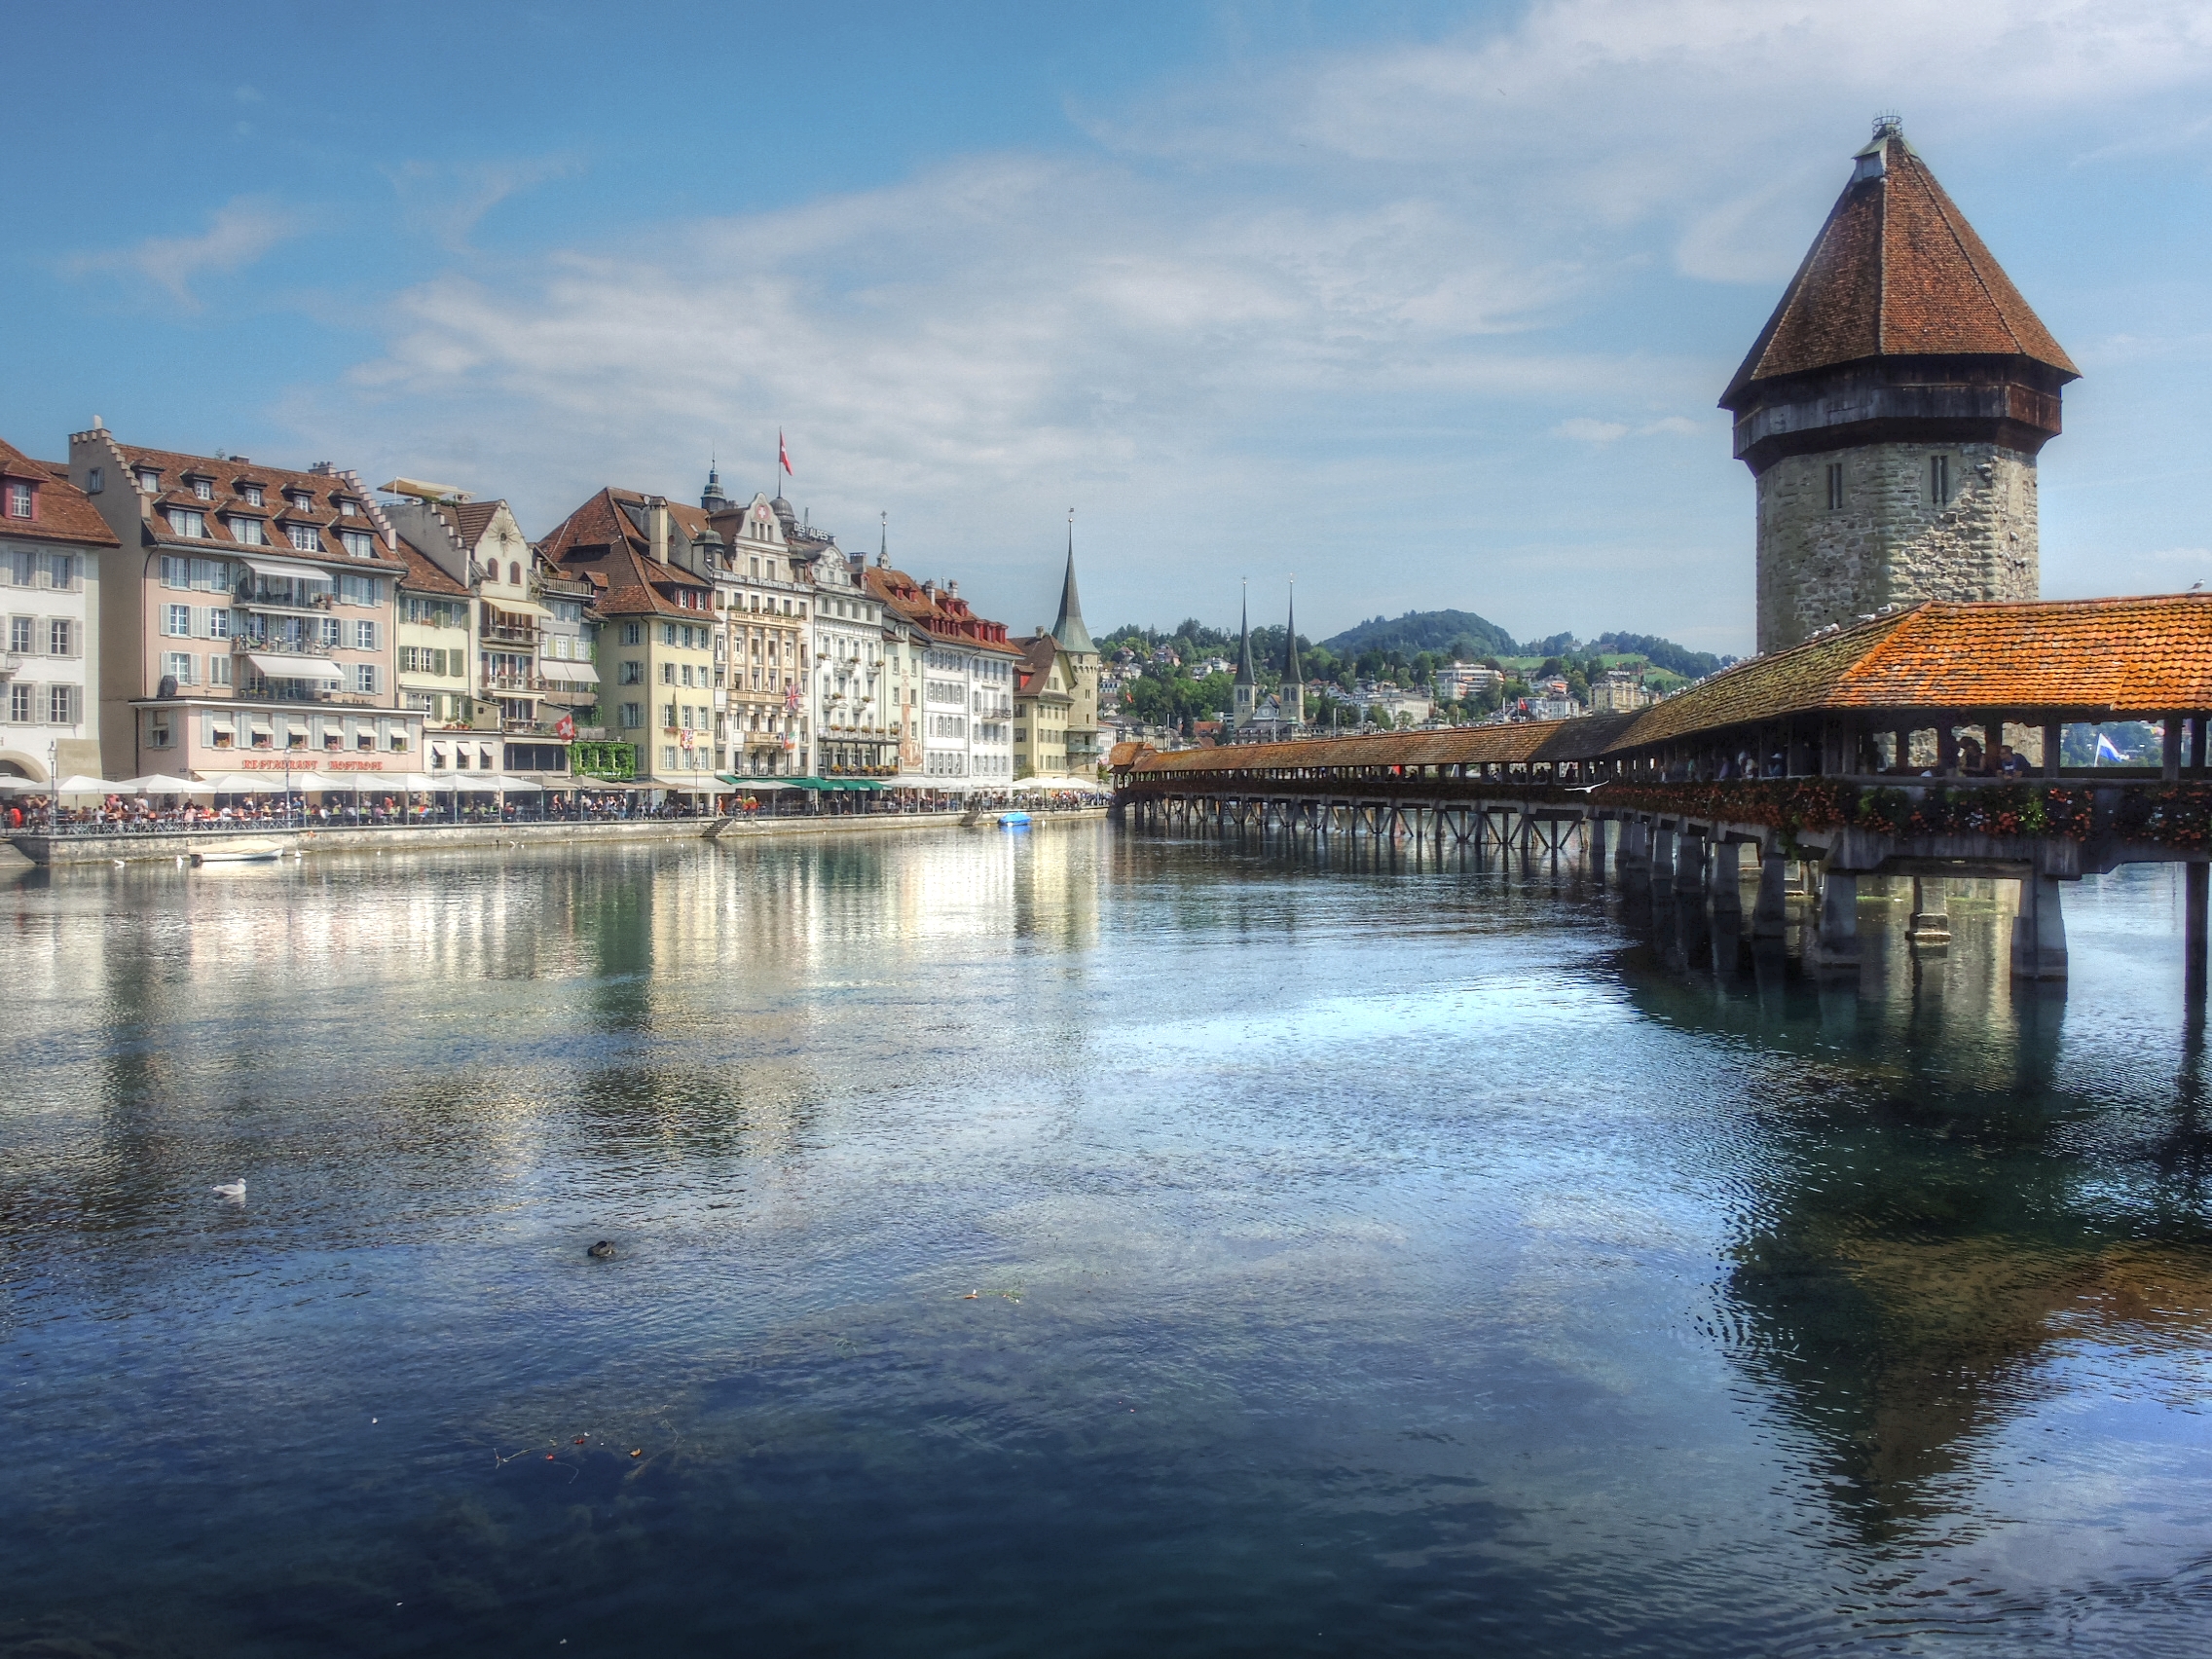 Greetings from Lucerne...